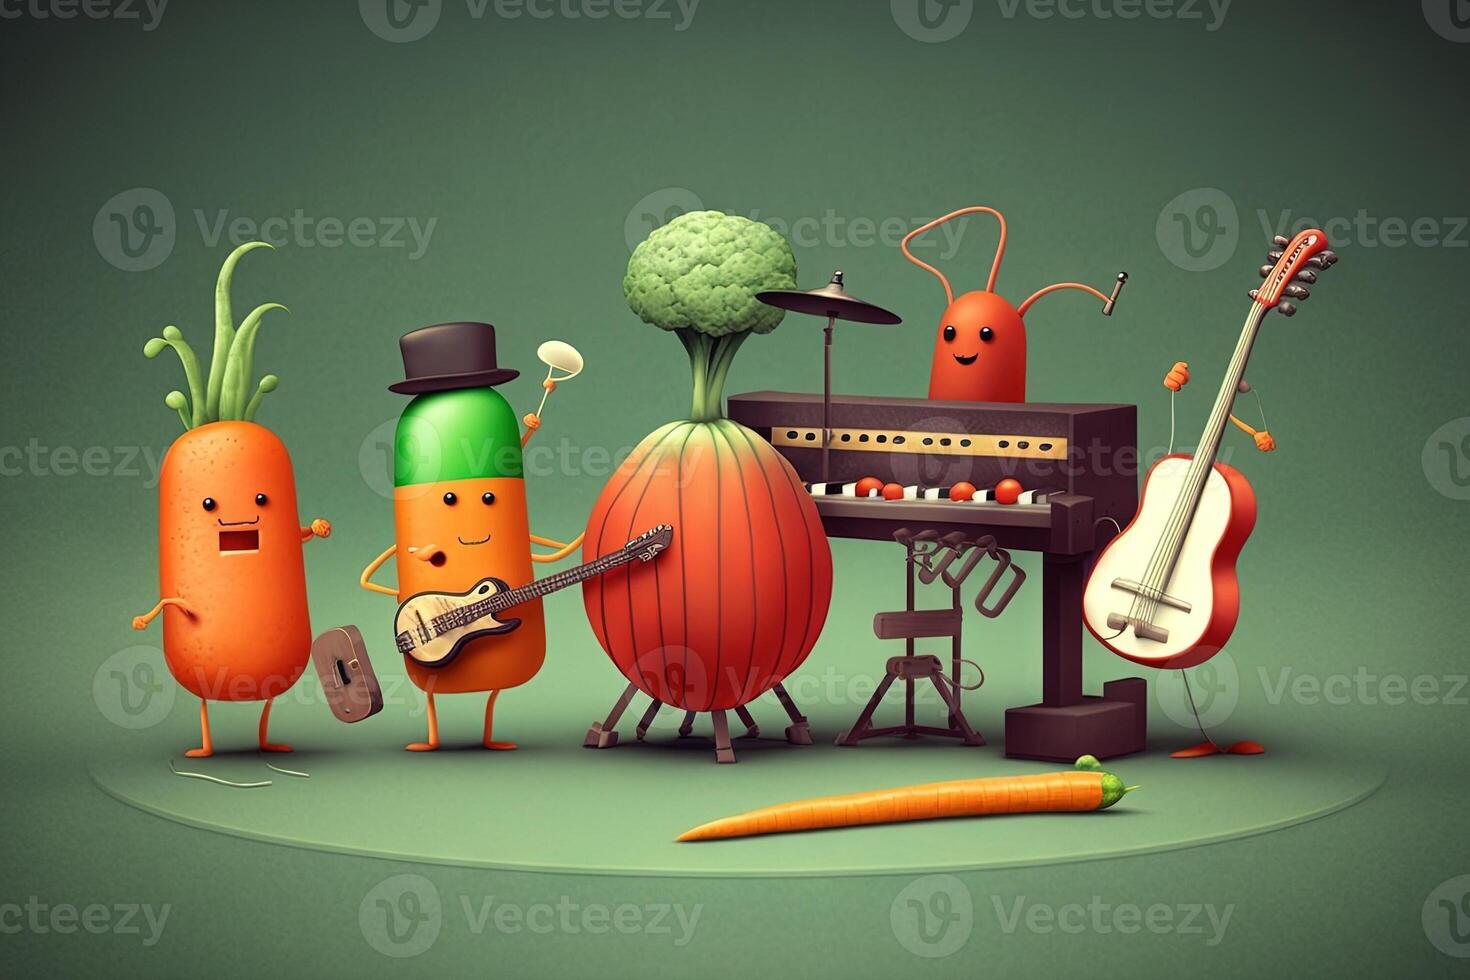 Vegetables rock band play music carrot tomato zucchini illustration photo